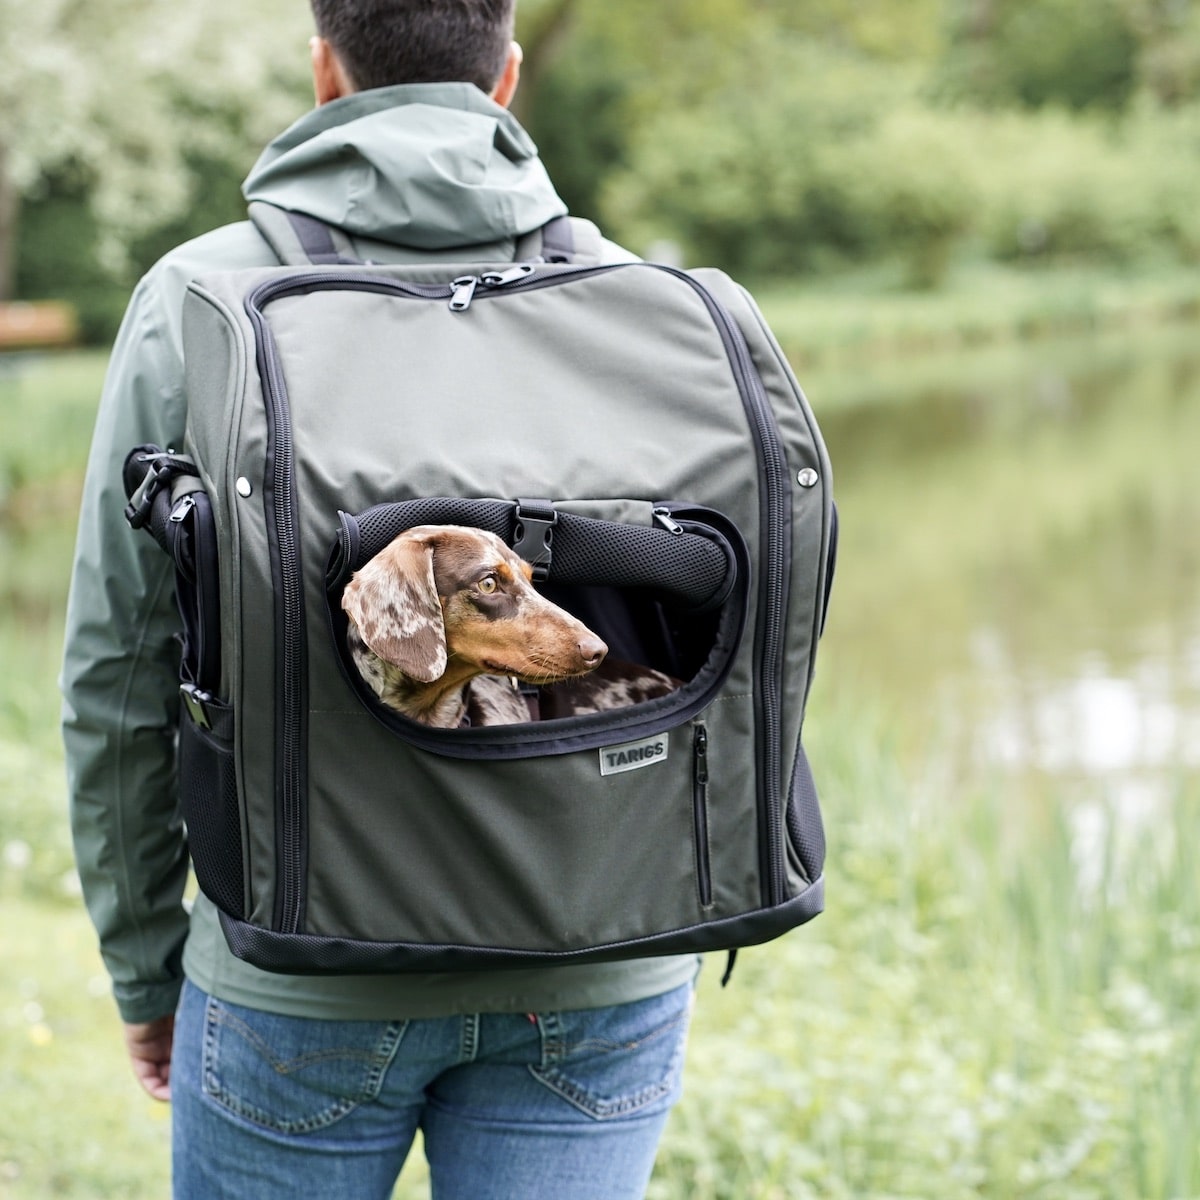 Man carrying TARIGS Dachshund Backpack with a Miniature Dachshund in it in Olive Green